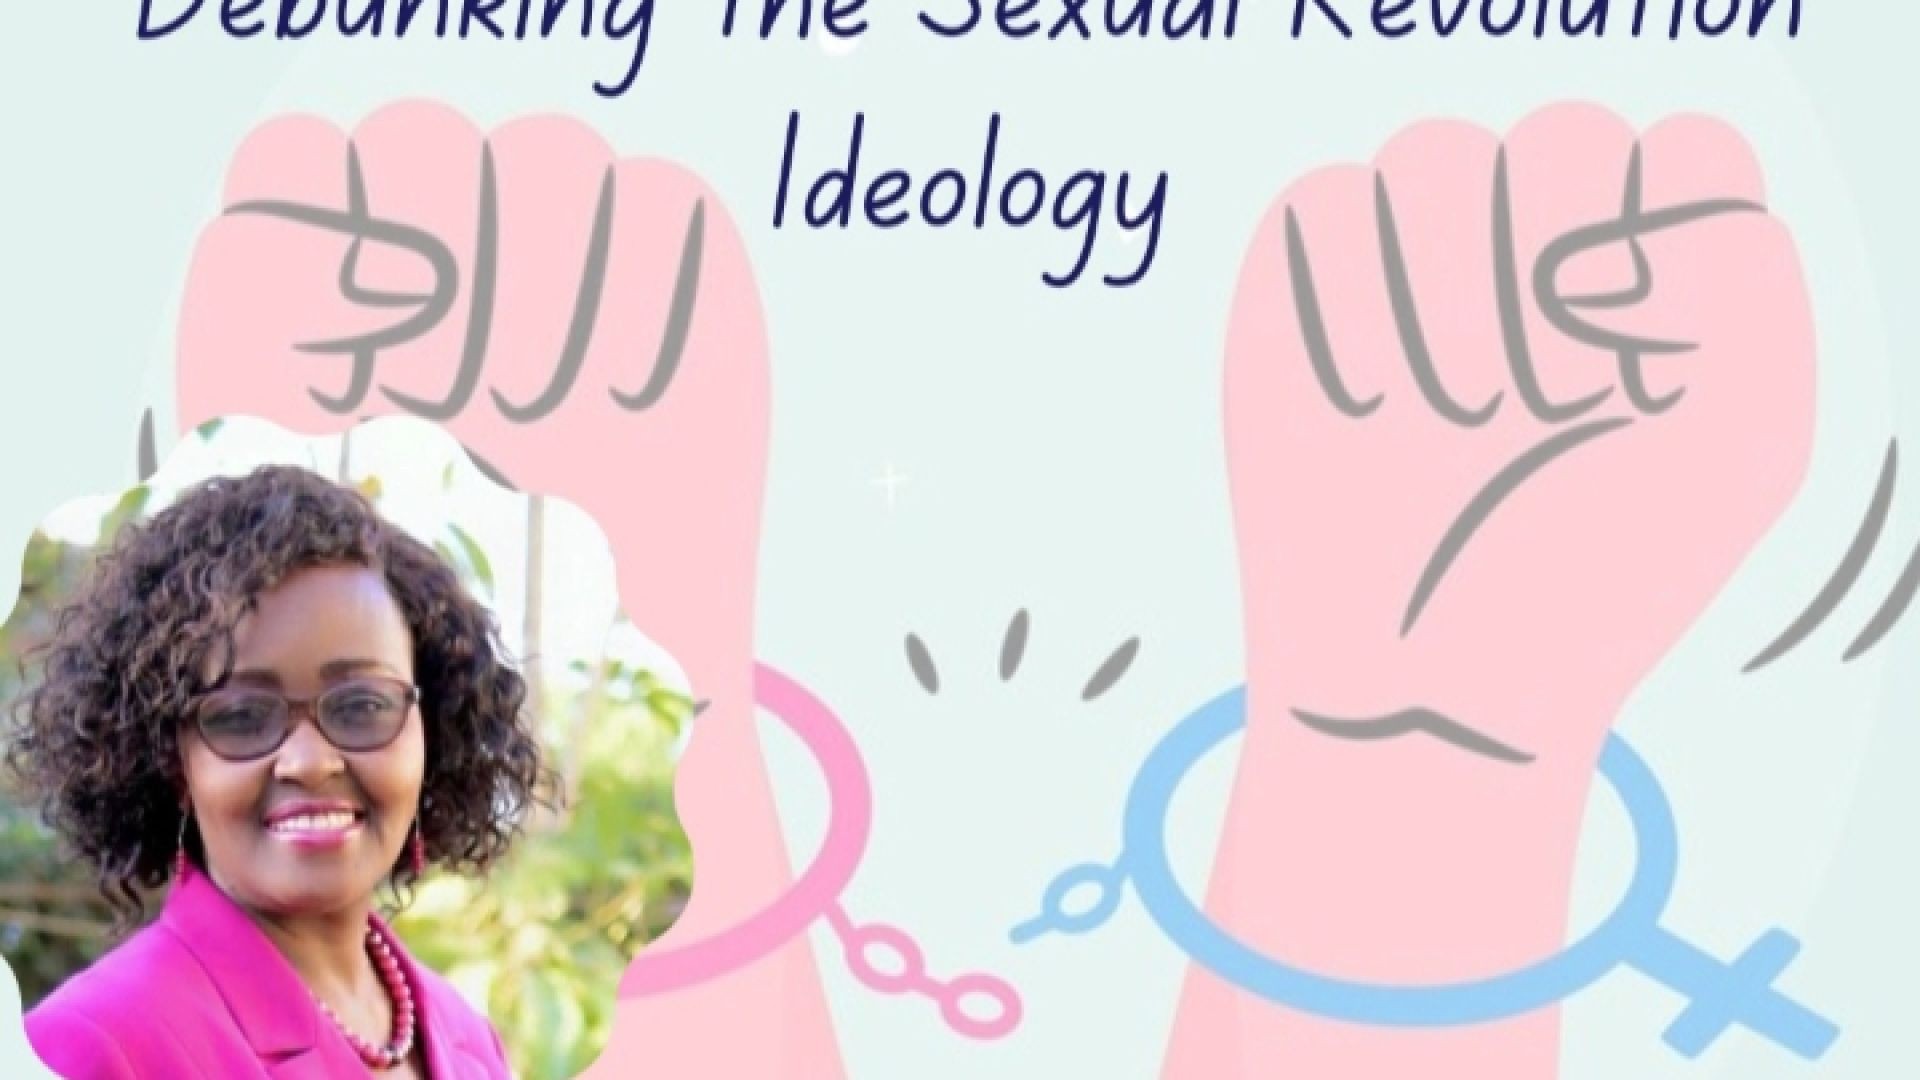 Debunking the Sexual Revolution Ideology